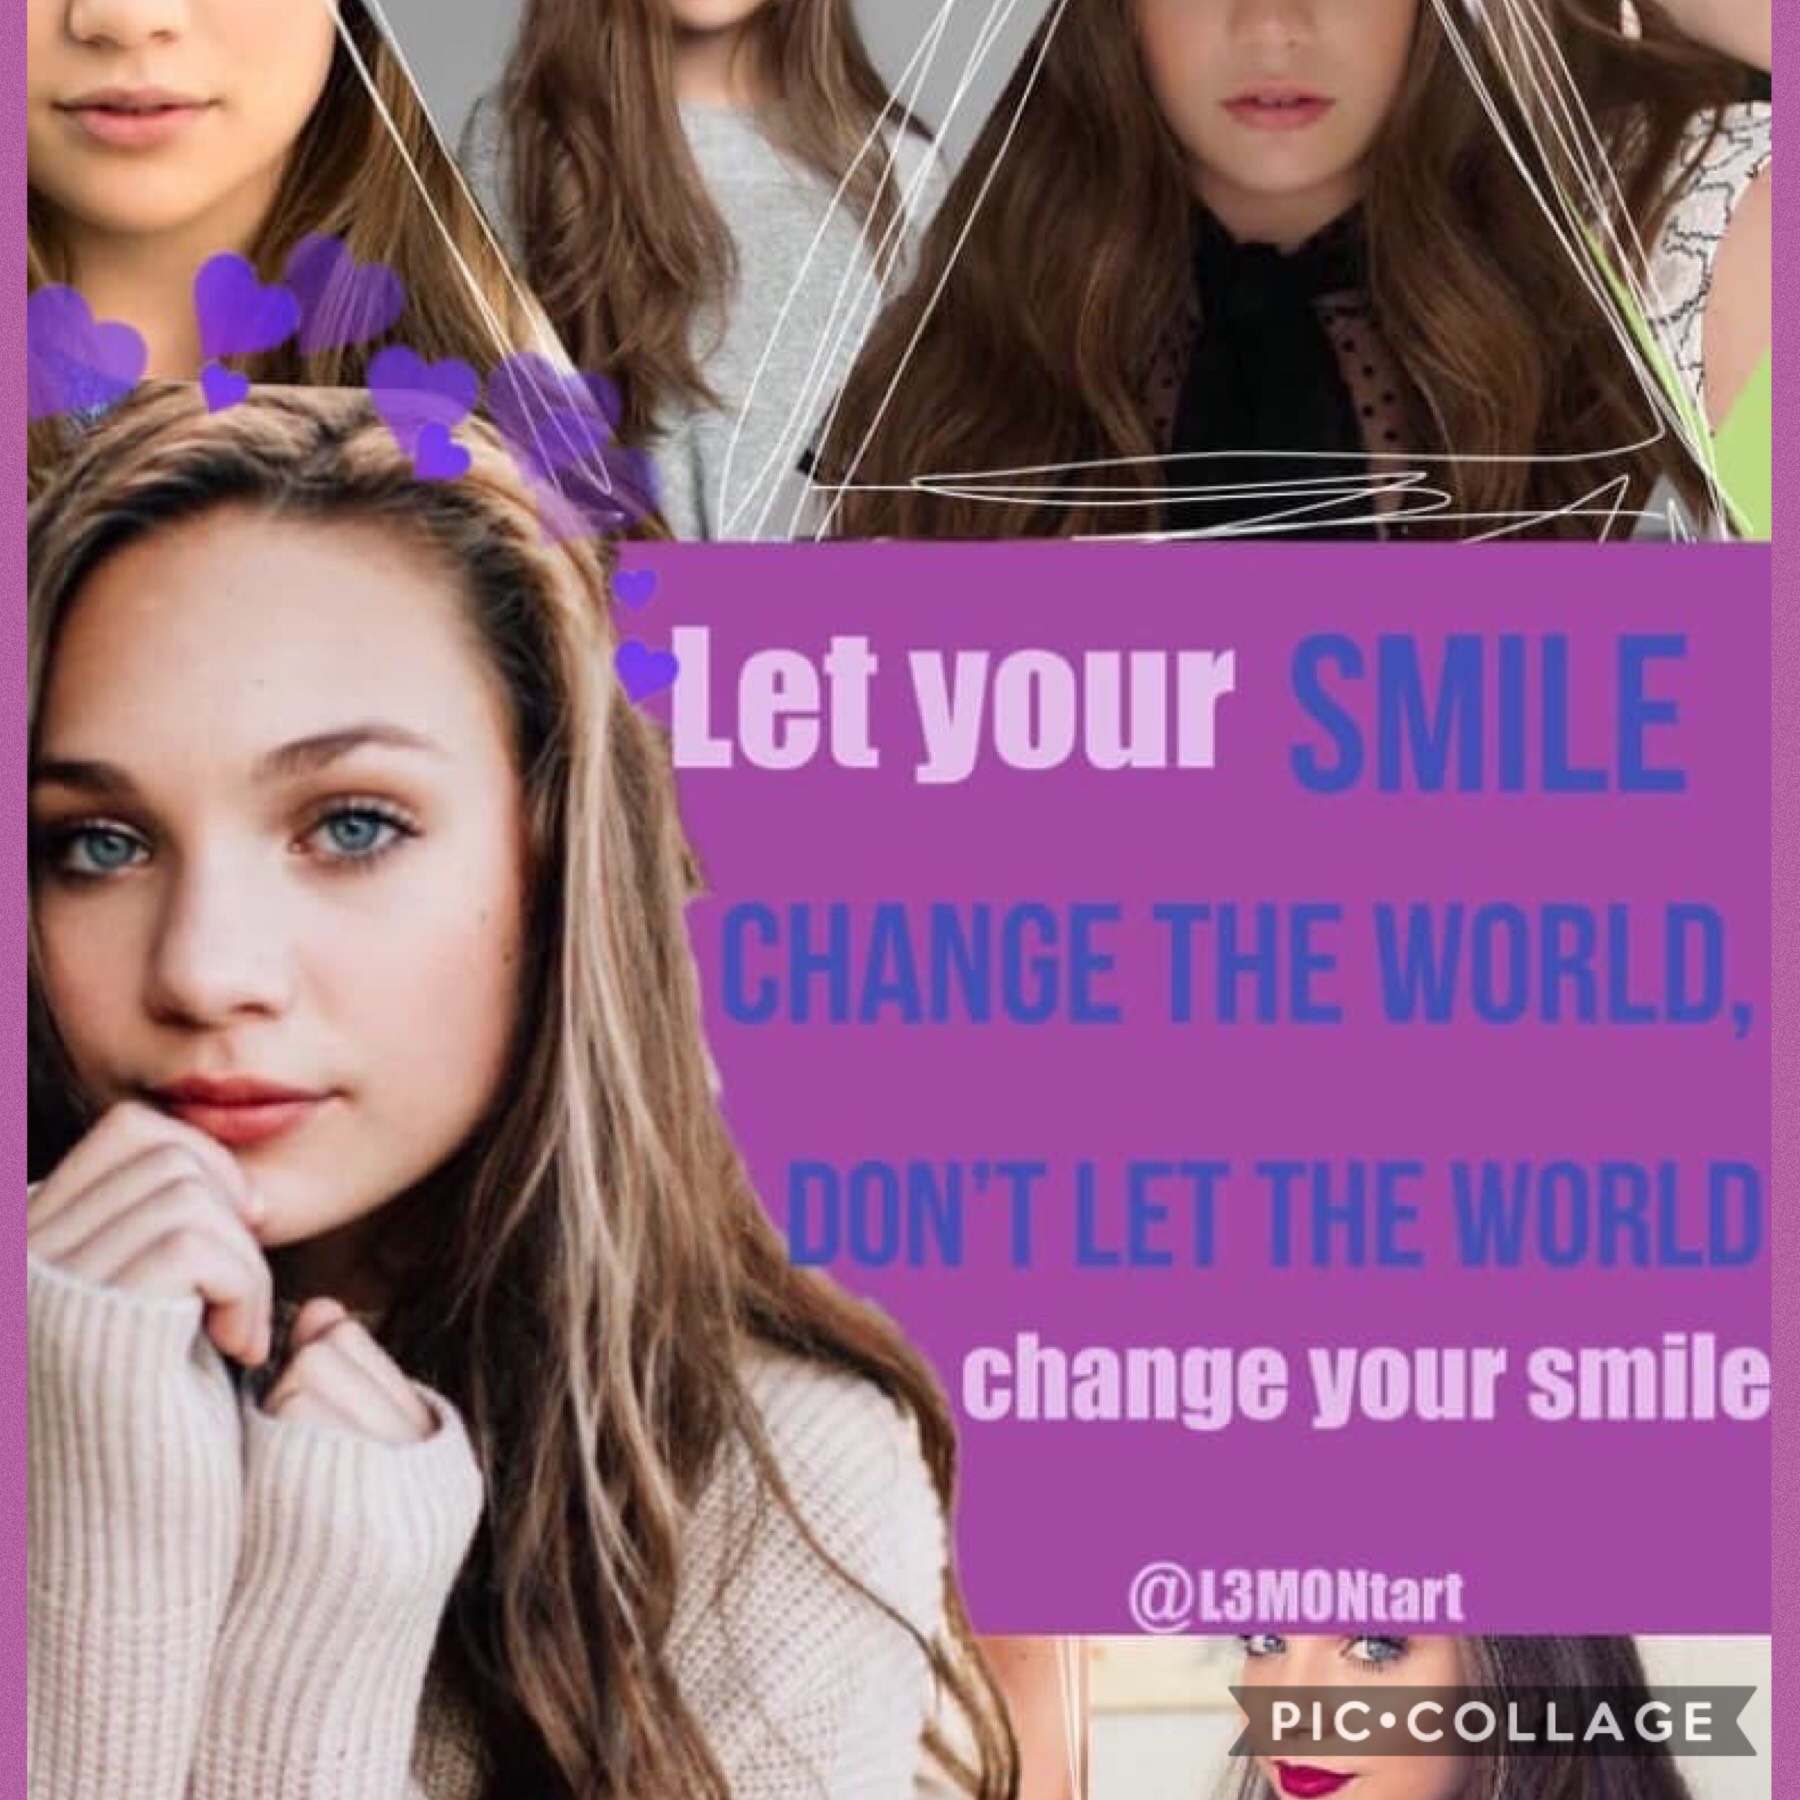 Maddie Ziegler tapp!!!
 My entry into @dancemomsbaes 400 contest
Make sure to give her a follow💘💘🎄🎄🎄🎄





2 more days till Christmas